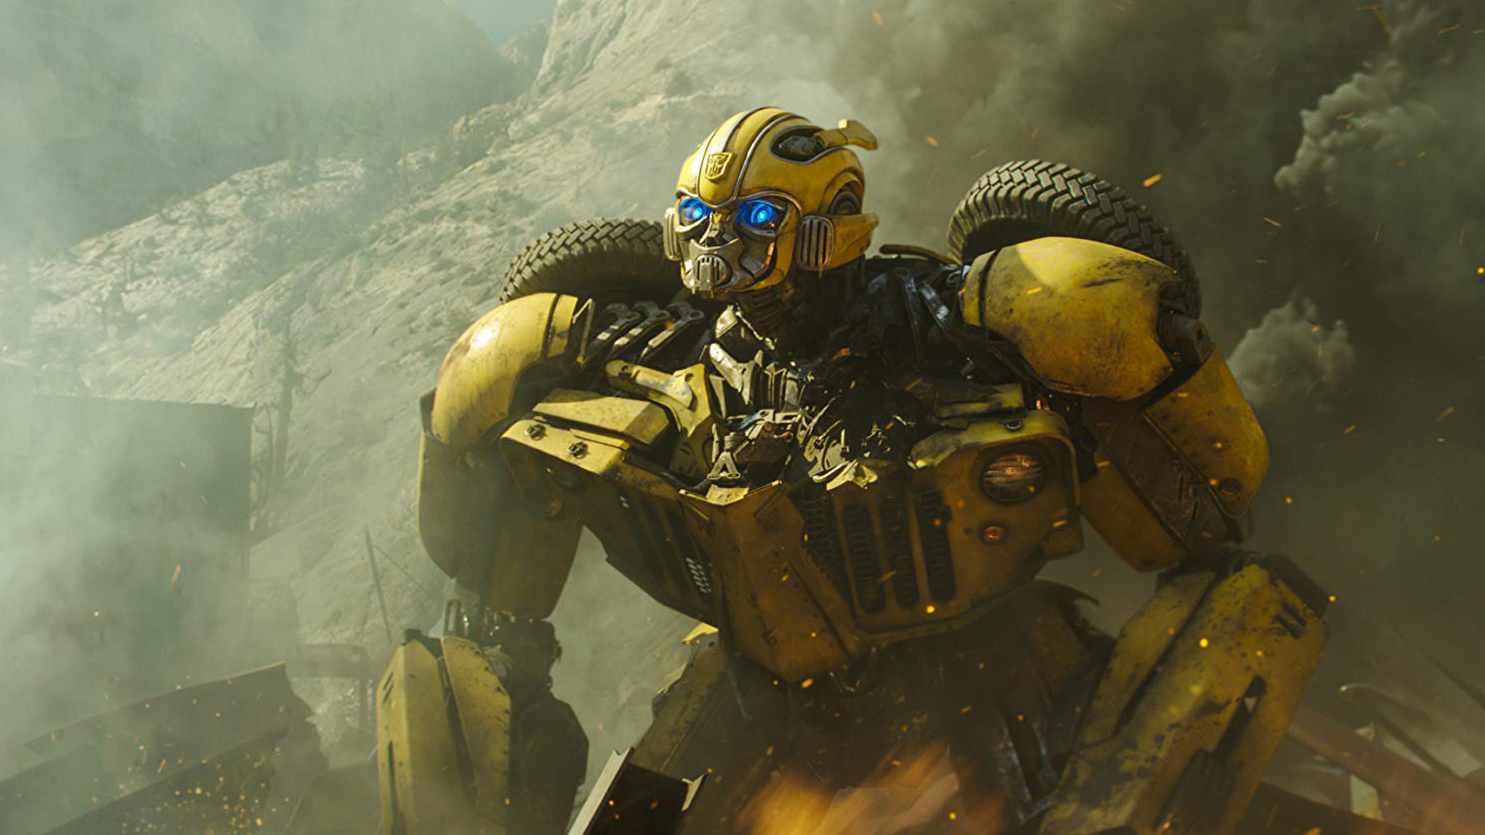 B-127 or Bumblebee gets a film all to himself in BumbleBee (2018)